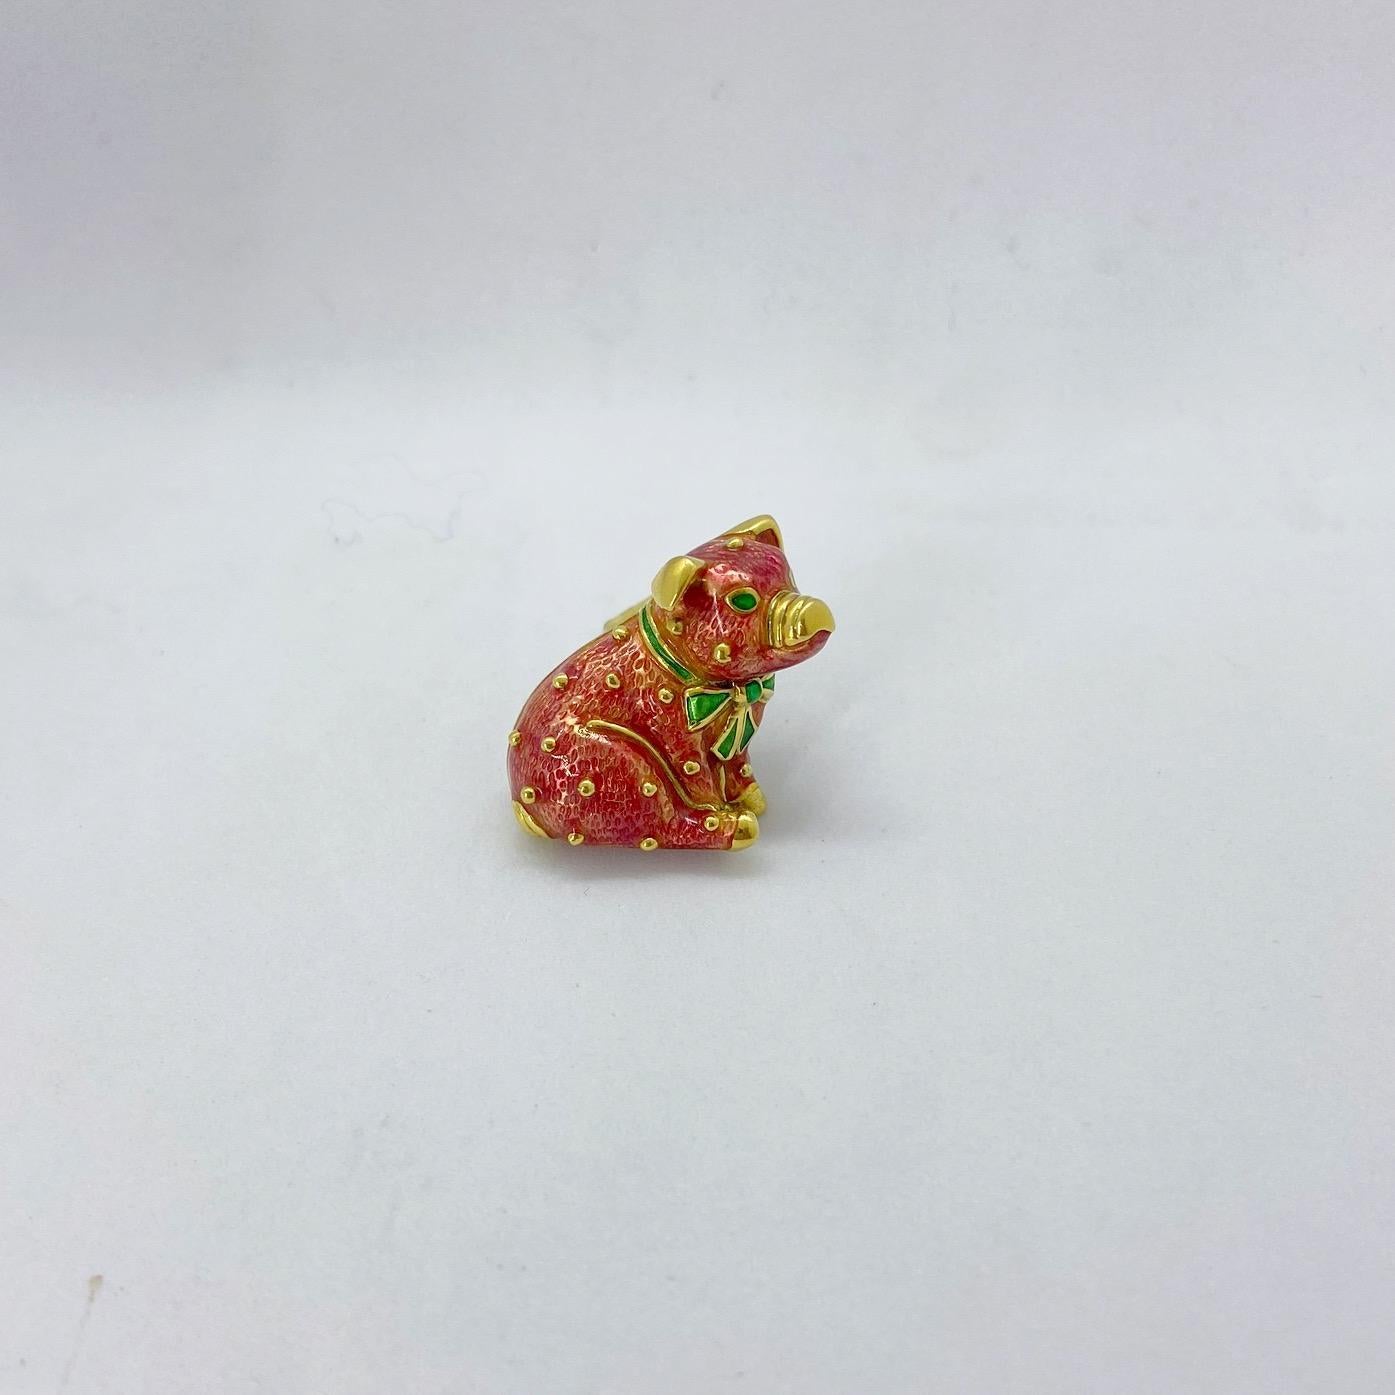 This 18 karat yellow gold brooch was designed by Hidalgo. The company is most noted for their beautiful enamel work. This adorable pig brooch is the perfect example of their craftsmanship. The pig is enameled in a candy pink color with green accents